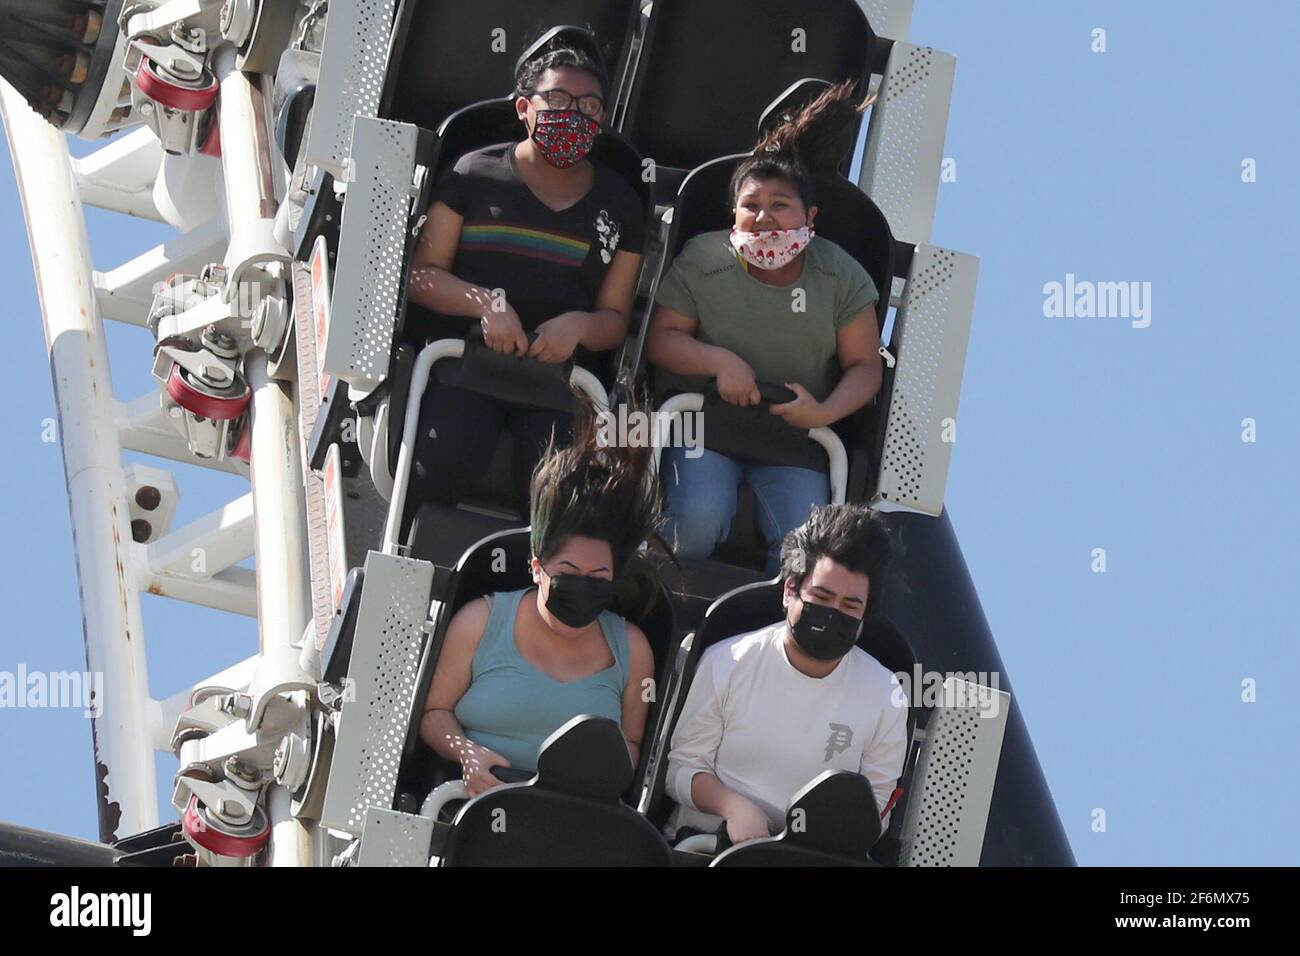 People ride a roller coaster at Six Flags Magic Mountain amusement park on the first day of opening, as the coronavirus disease (COVID-19) continues, in Valencia, California, U.S., April 1, 2021. REUTERS/Lucy Nicholson Stock Photo